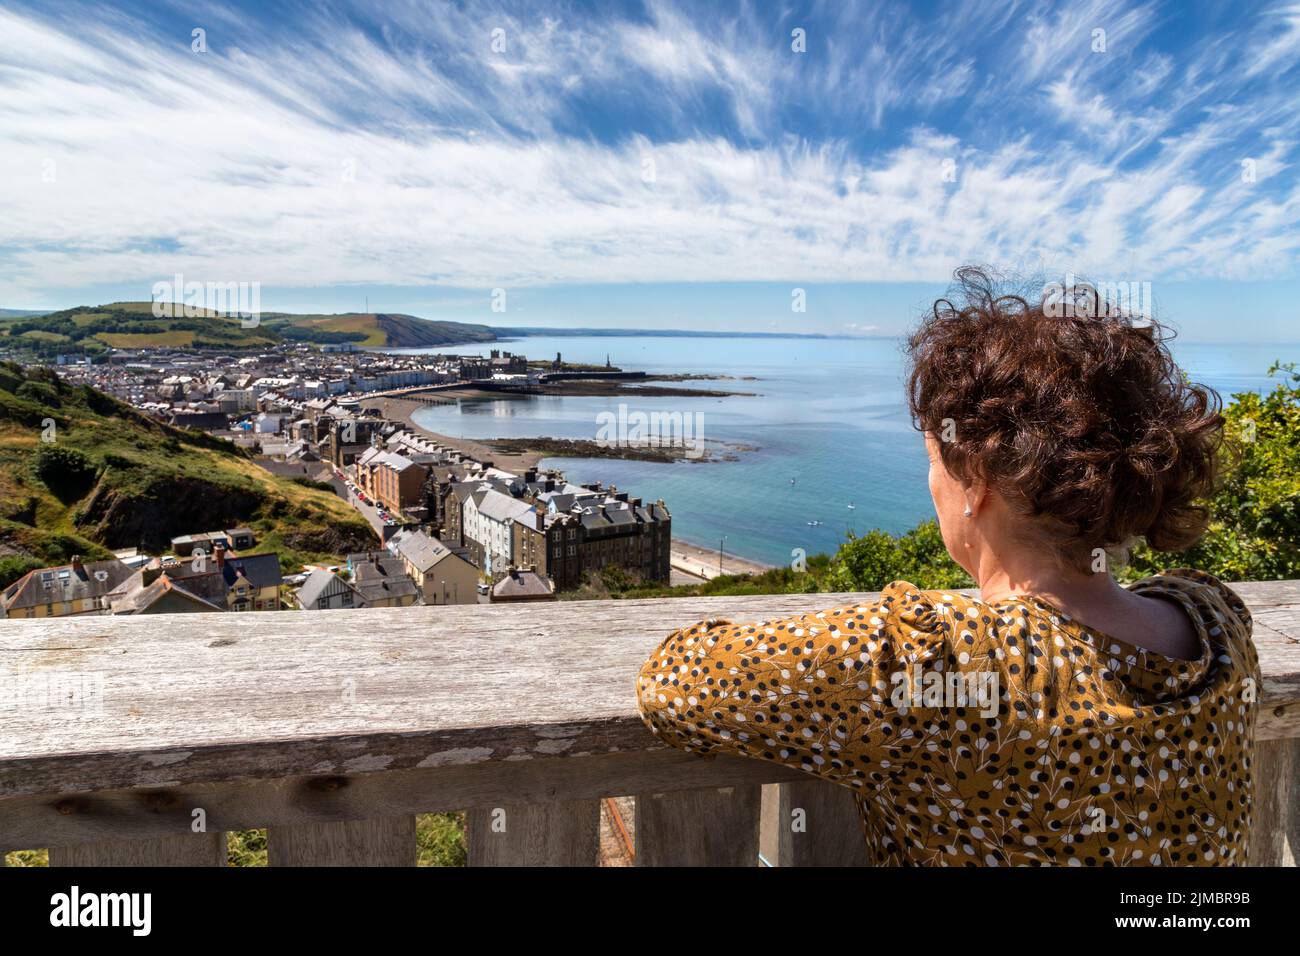 A woman takes in a glorious view of Aberystwyth and Cardigan Bay from a vantage point on Constitution Hill, Wales, UK. Travel, tourism concept. Stock Photo